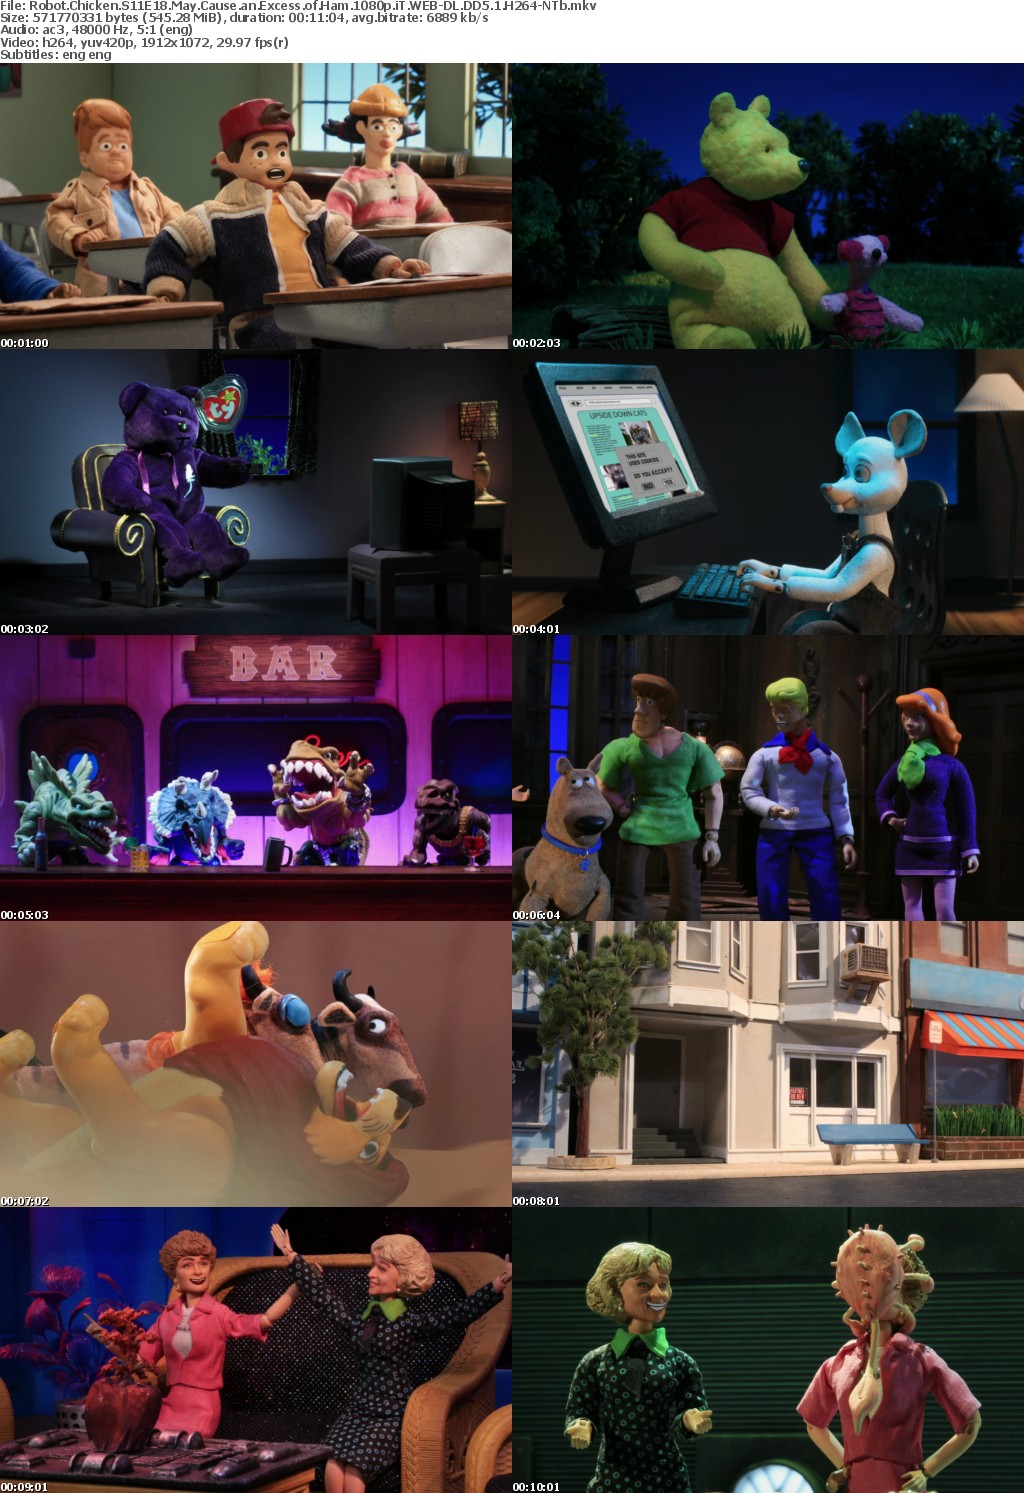 Robot Chicken S11E18 May Cause an Excess of Ham 1080p WEB-DL DD5 1 H264-NTb